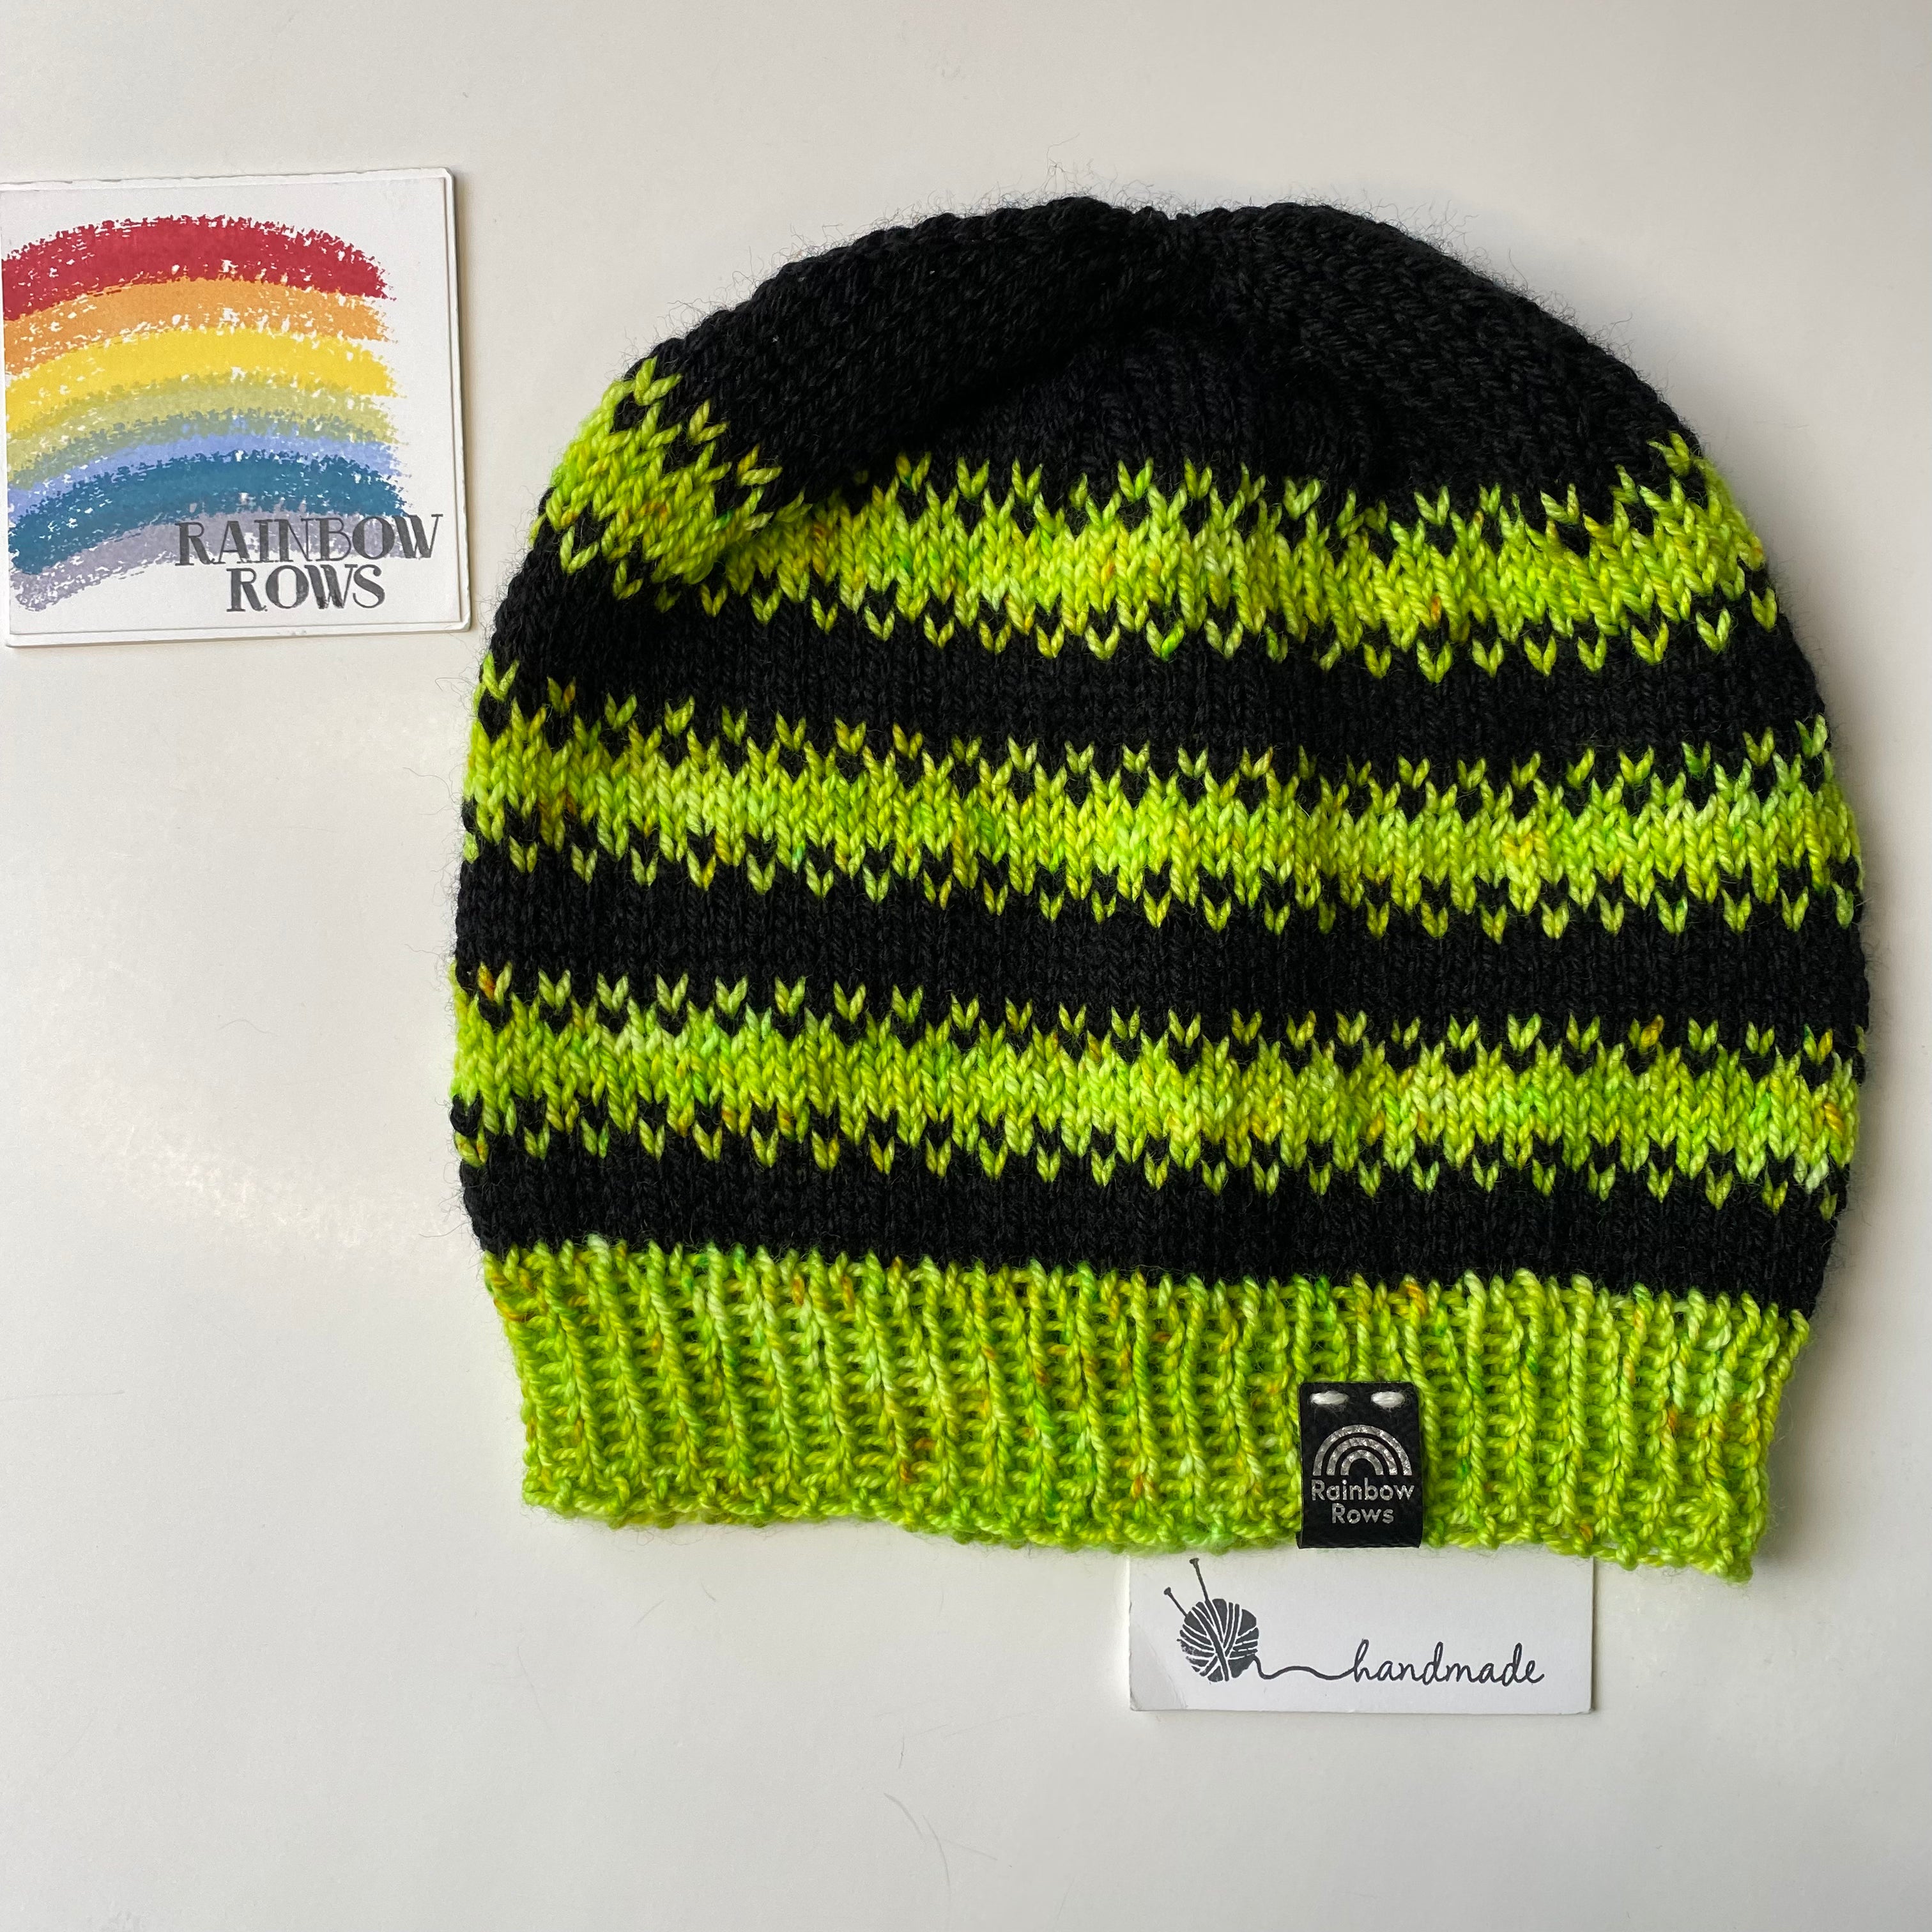 Neon Green and Black Blurred lines beanie toque